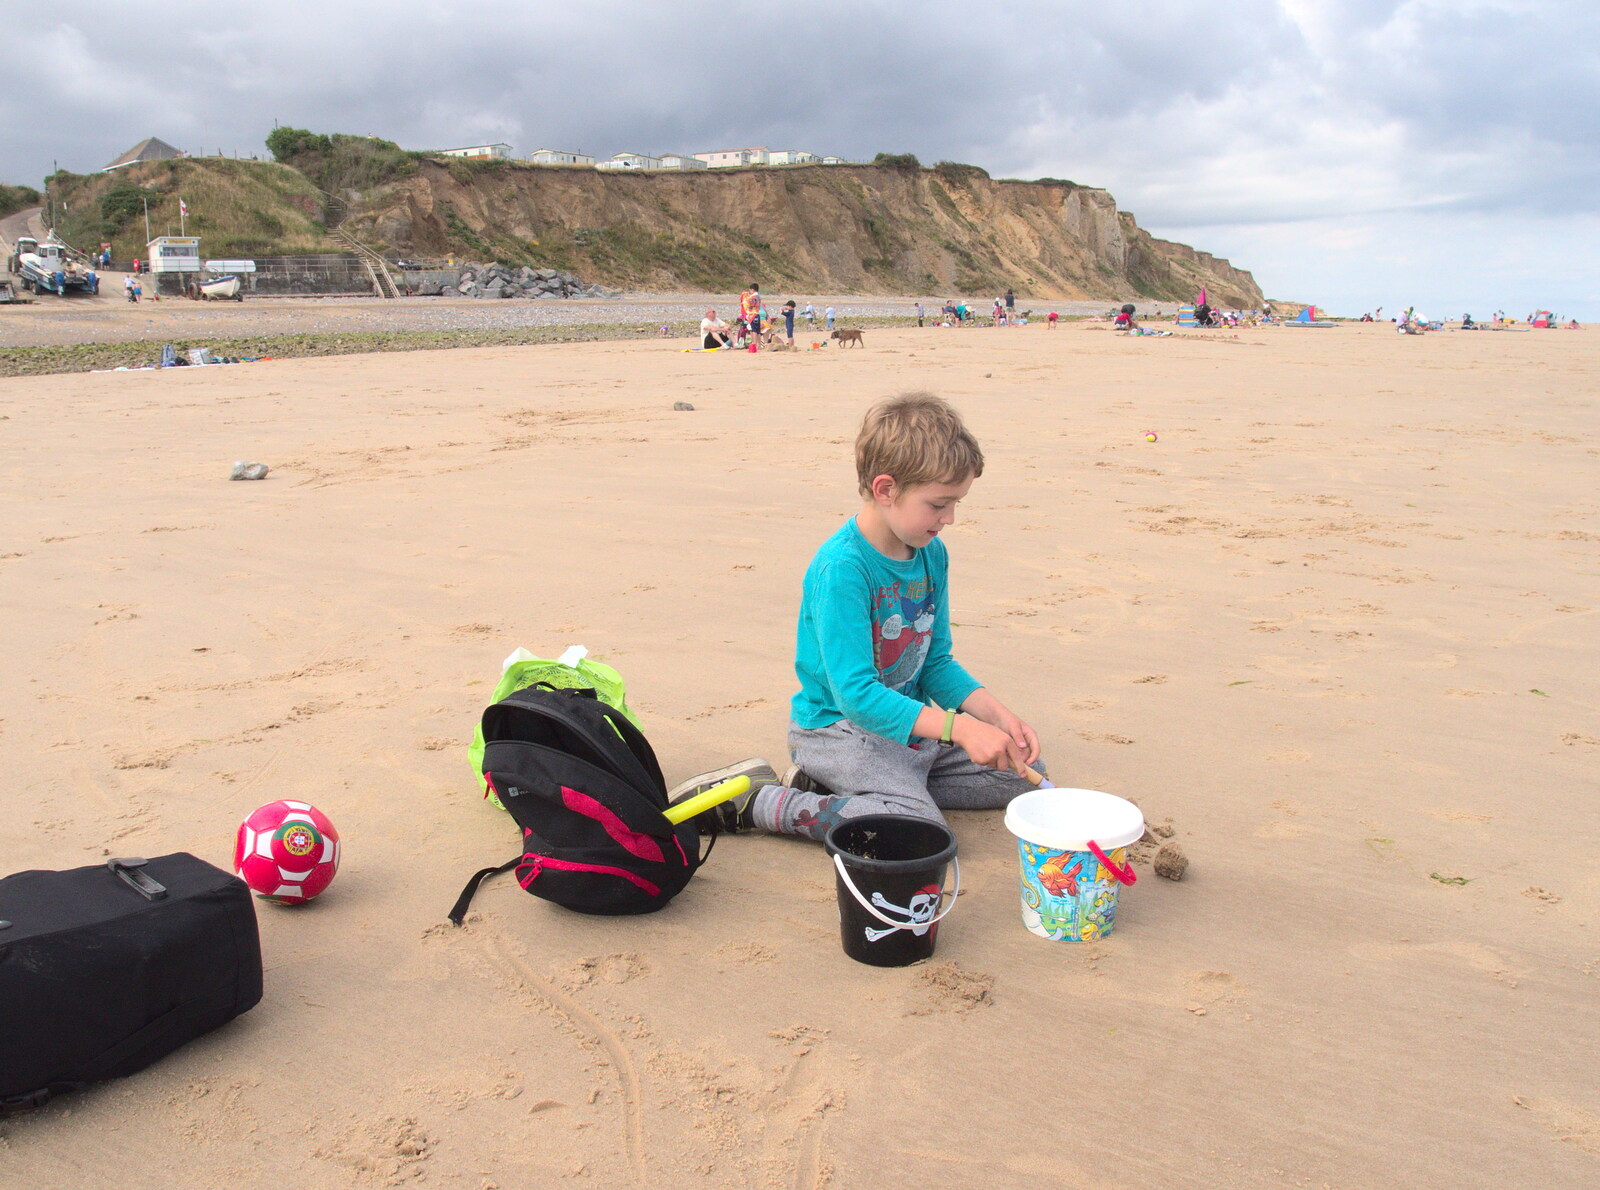 Fred on the beach - it's perfect sand-castle sand from Camping in West Runton, North Norfolk - 30th July 2016